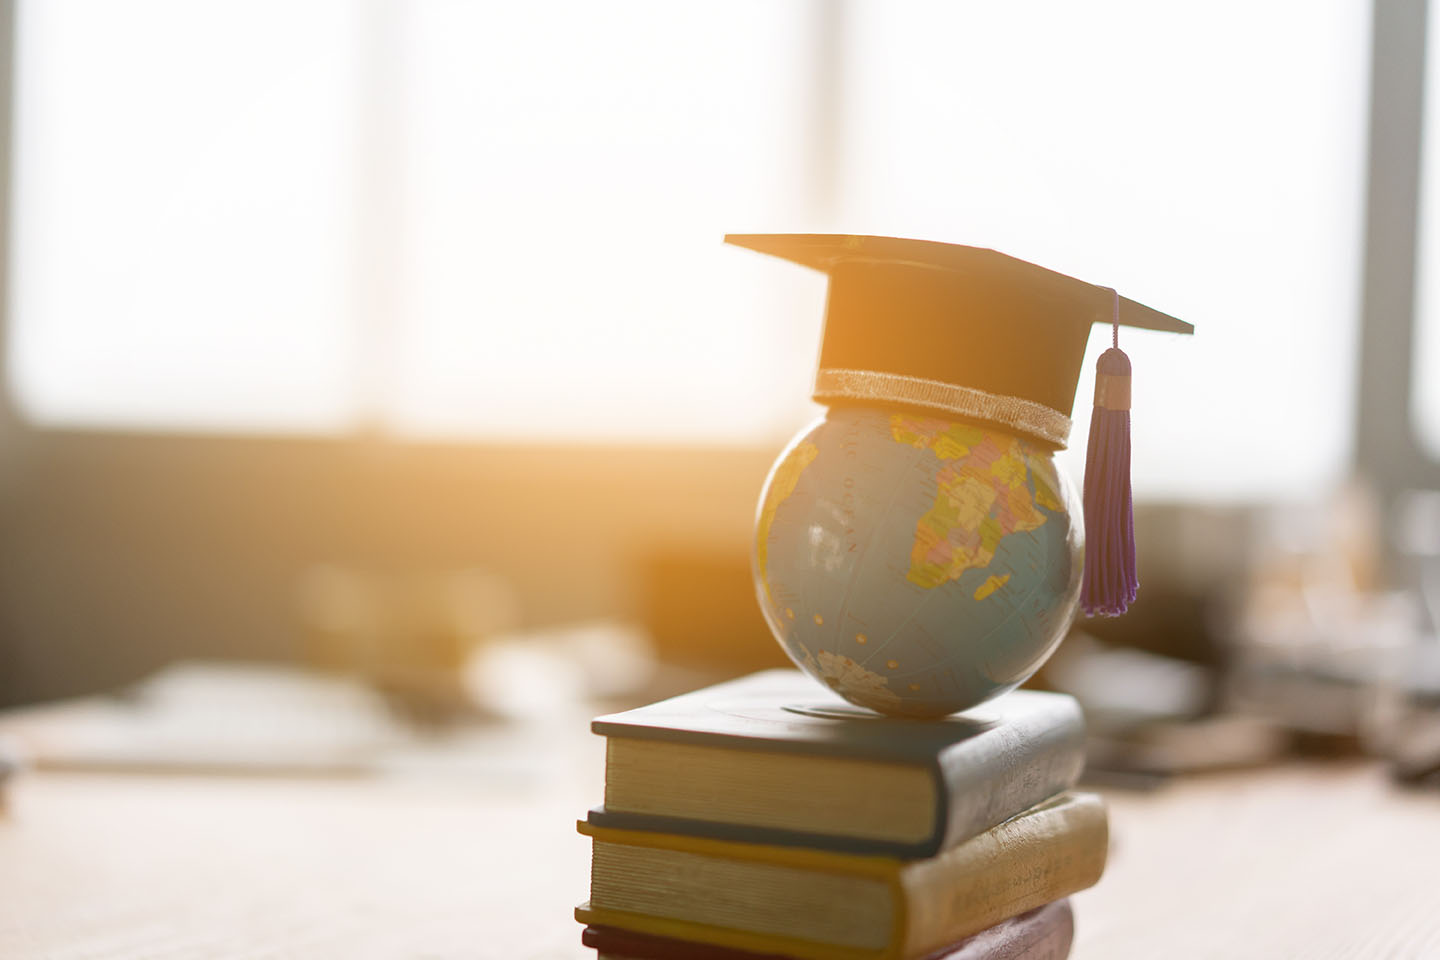 Why we need to integrate sustainability in higher education